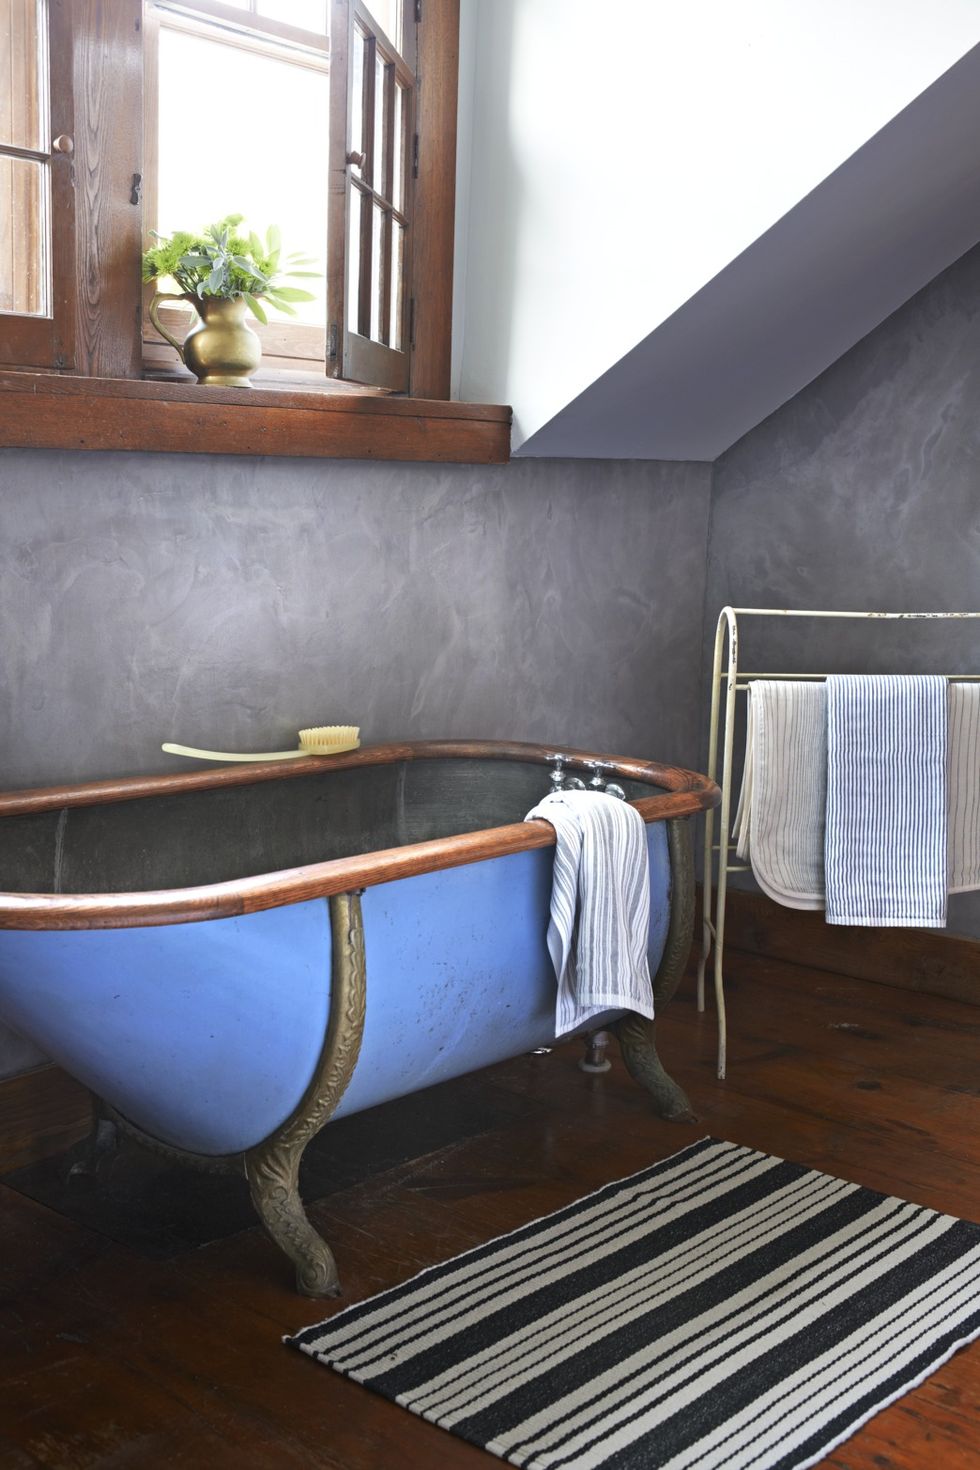 https://hips.hearstapps.com/hmg-prod/images/blue-wood-rimmed-metal-claw-foot-tub-1557431845.jpg?crop=0.9987228607918264xw:1xh;center,top&resize=980:*